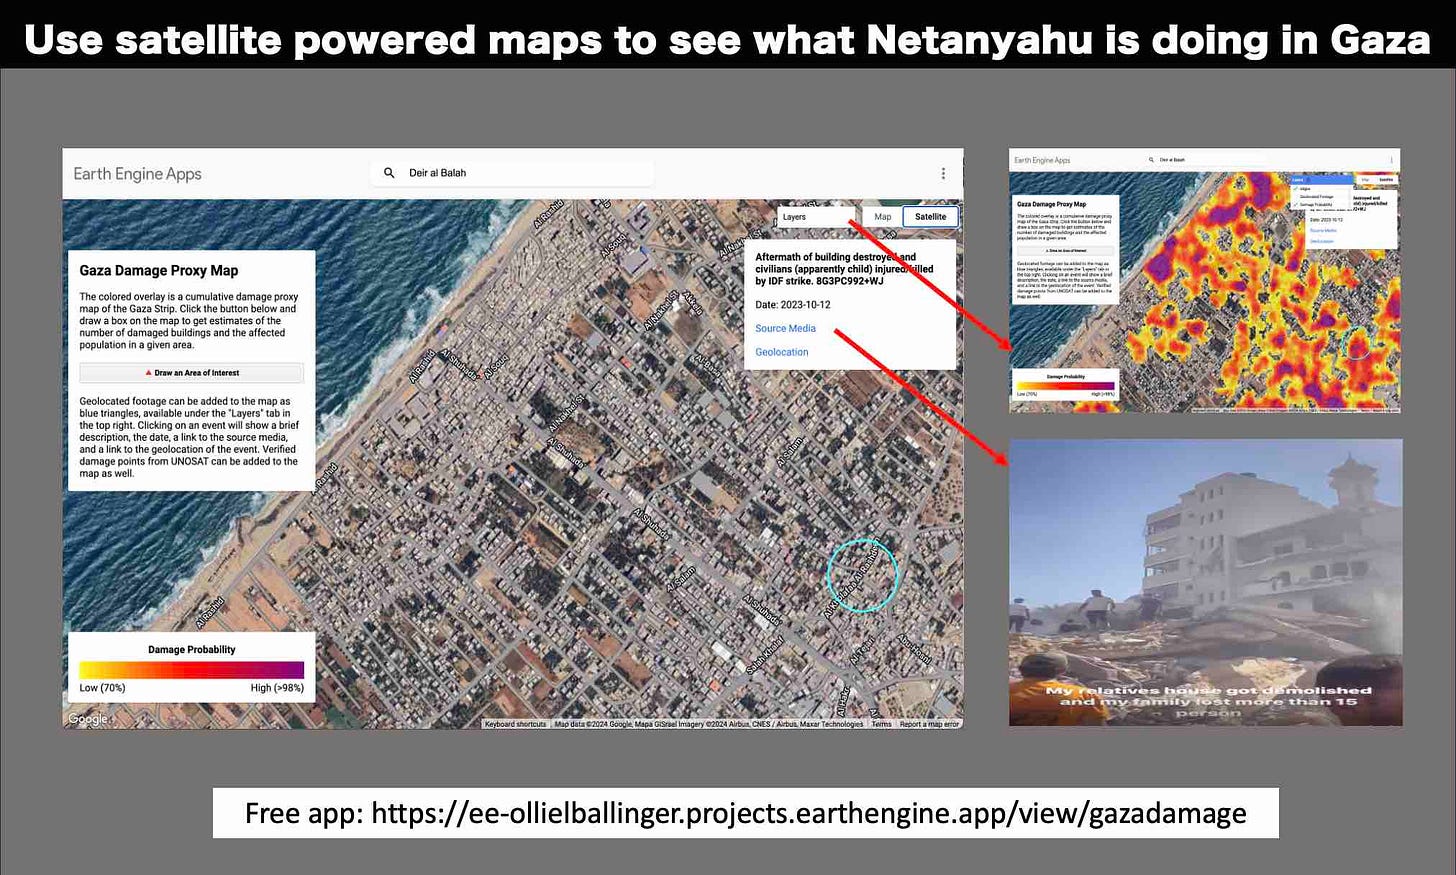 Use satellite powered maps to see what Netanyahu is doing in Gaza